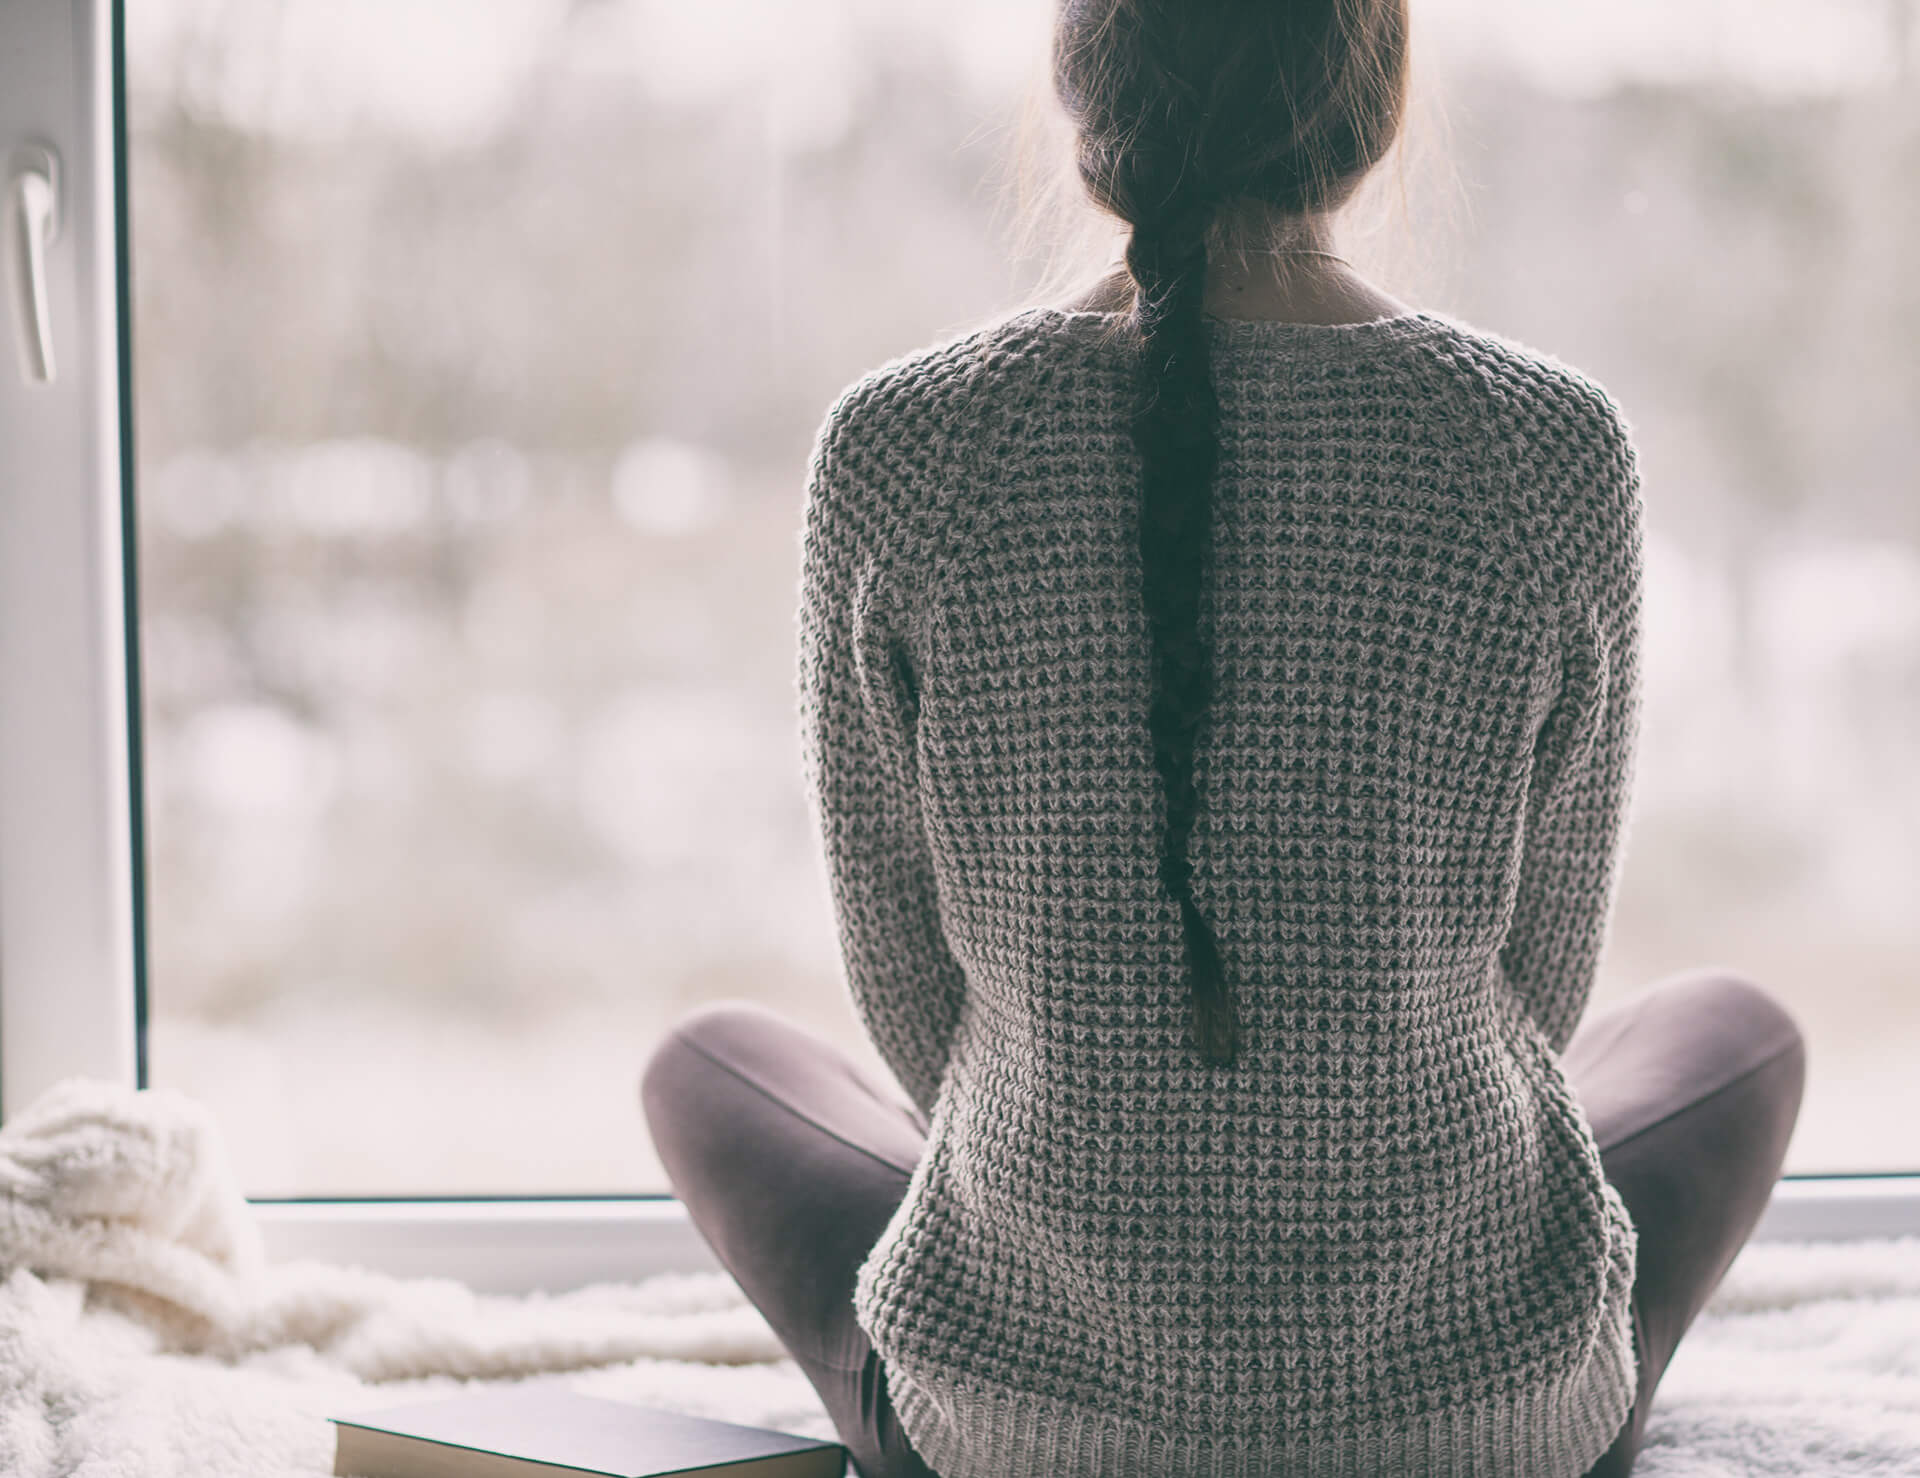 Woman in sweater looking outside at cold winter scene